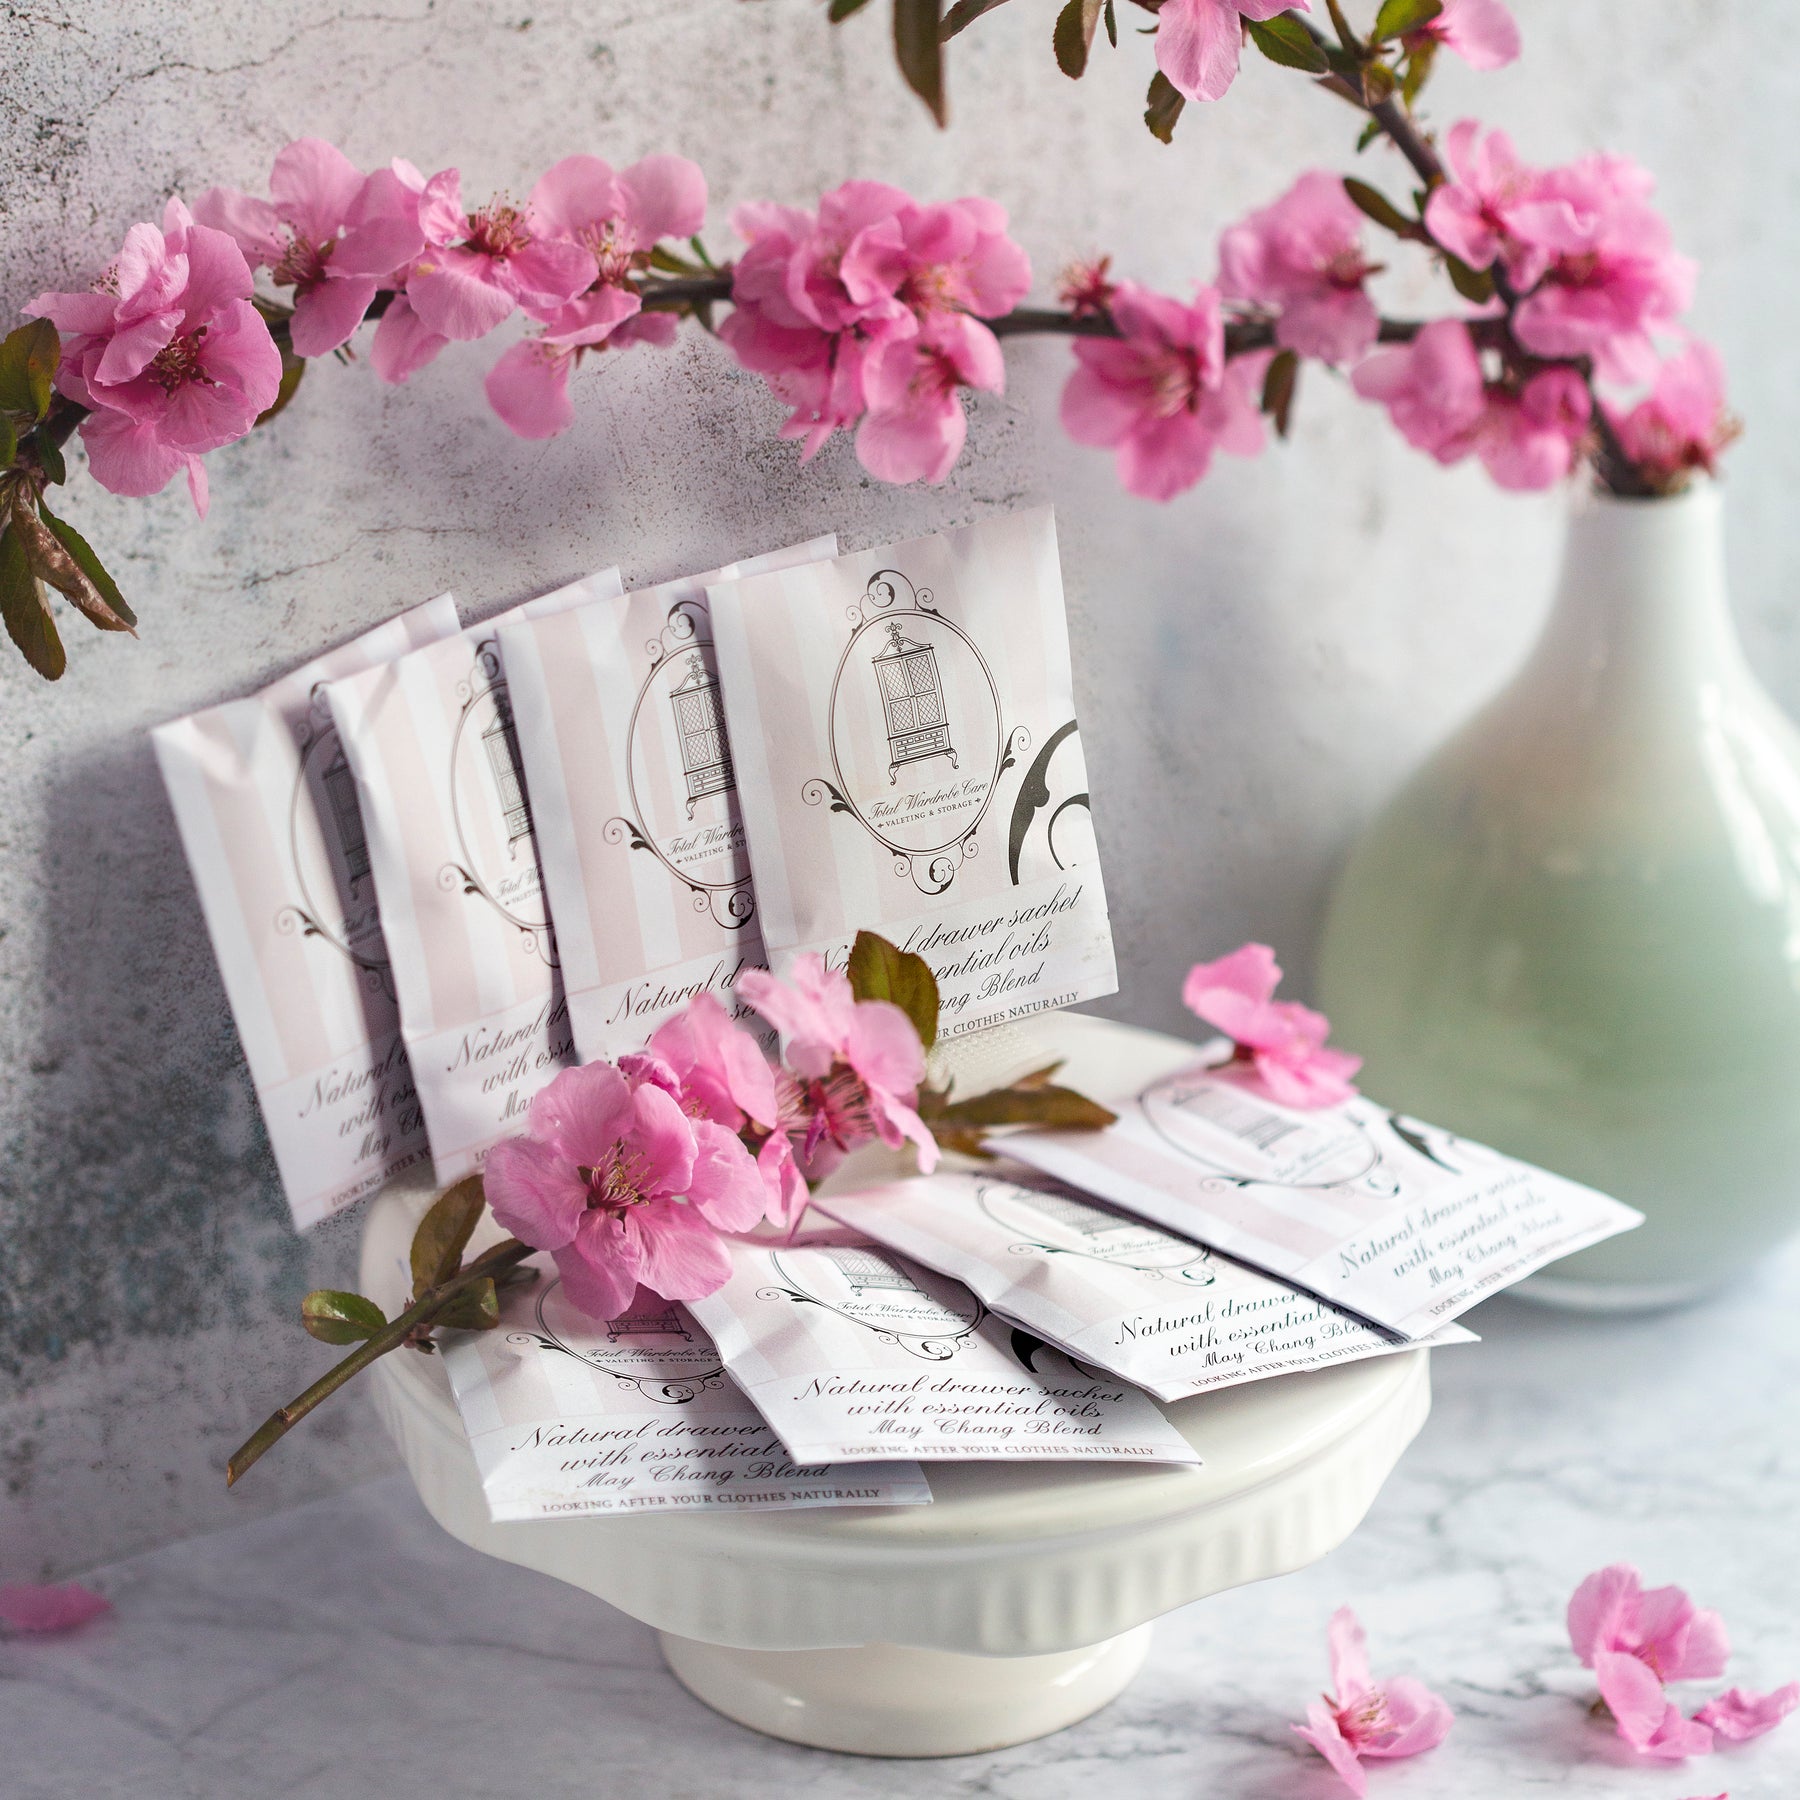 May chang drawer sachets lined on ceramic plate surrounded by pink flowers